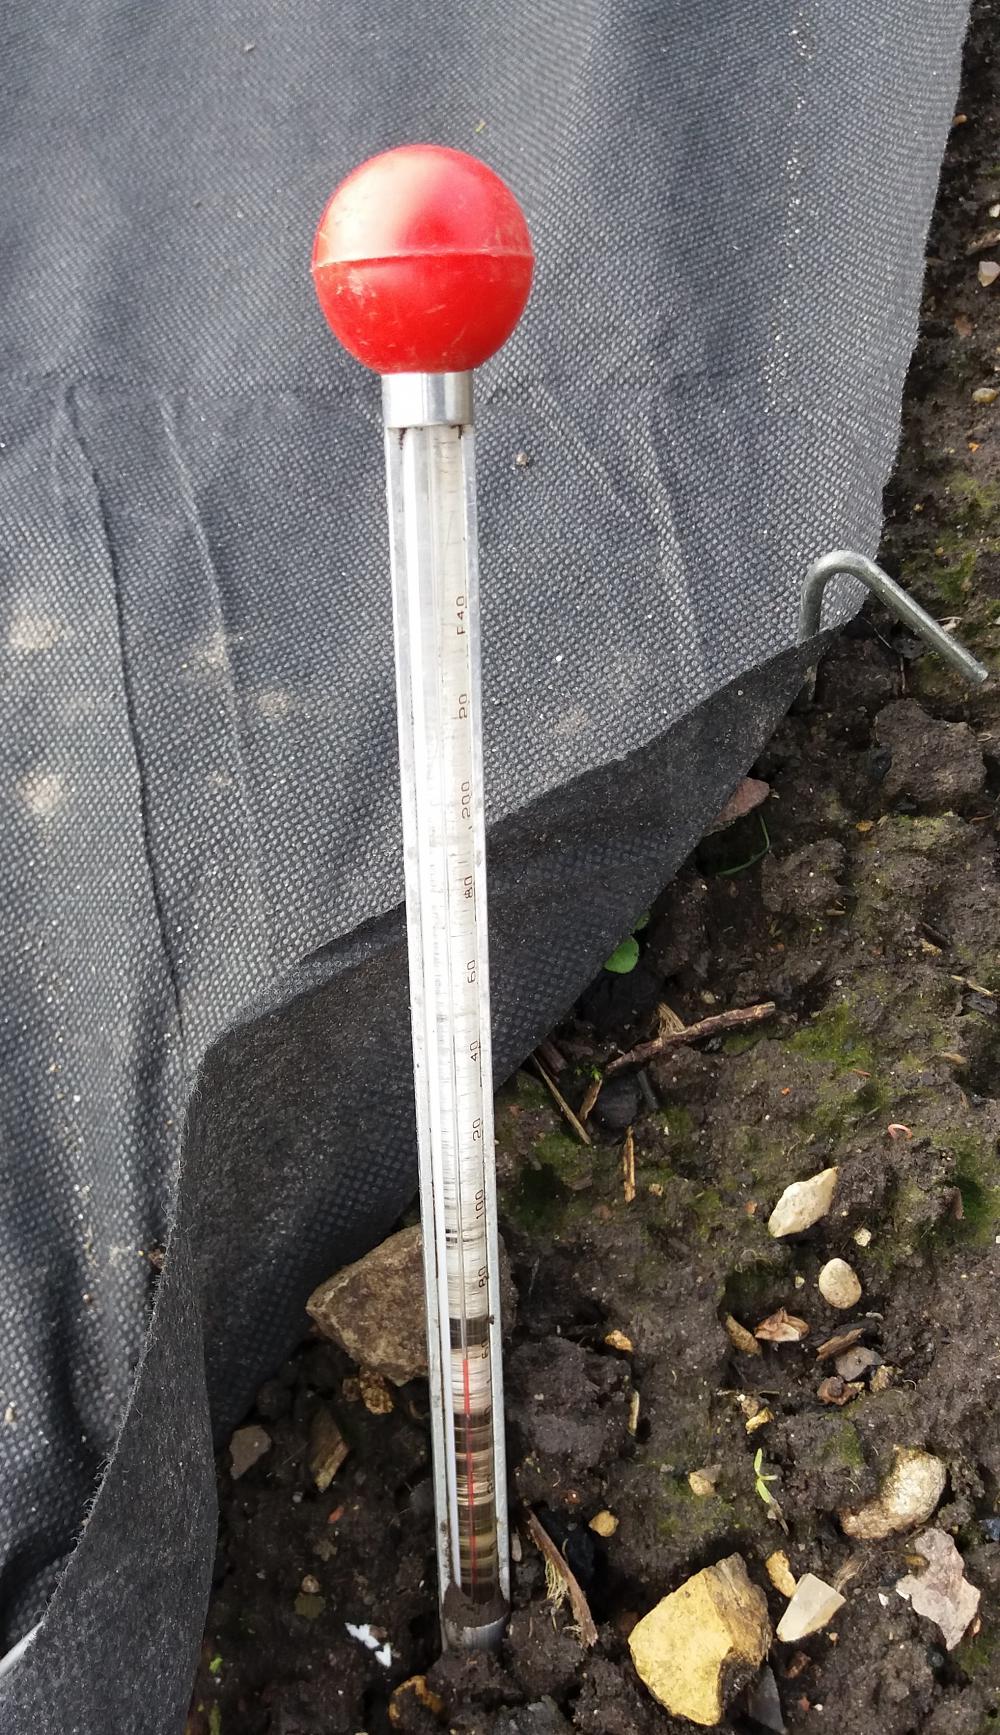 A soil thermometer can help with planting times